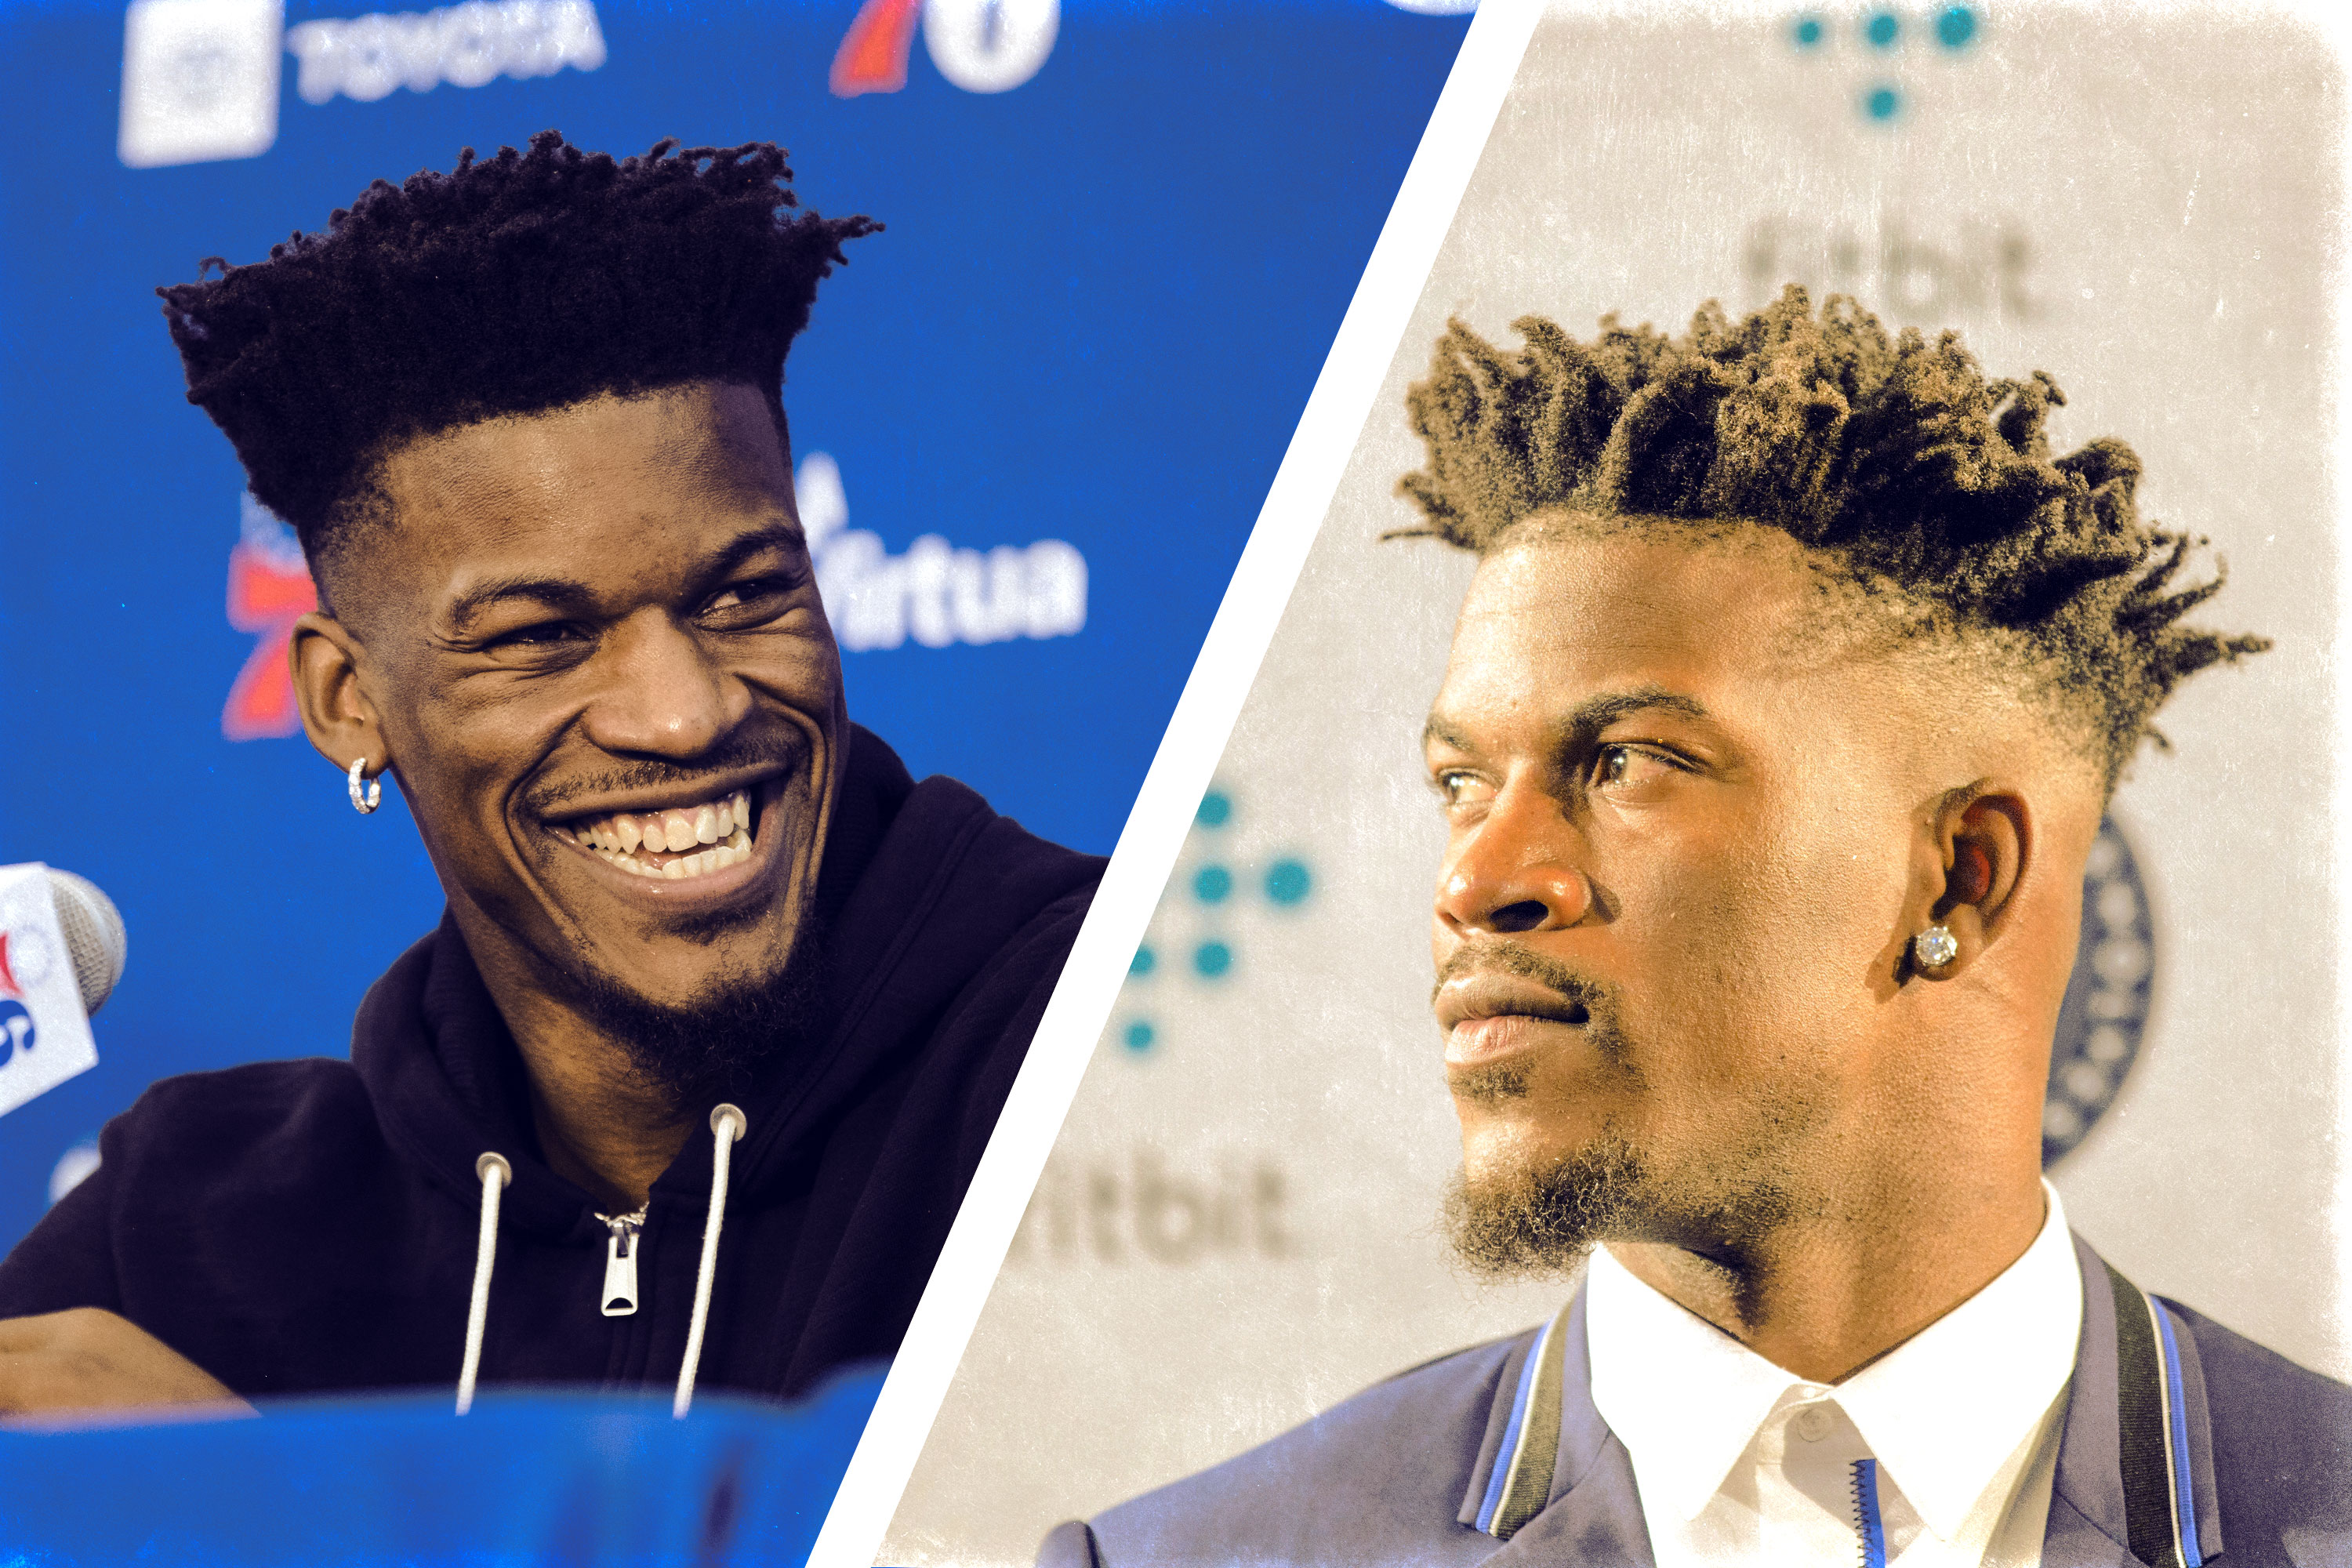 Images of Jimmy Butler at his opening press conferences in both Minnesota and Philadelphia